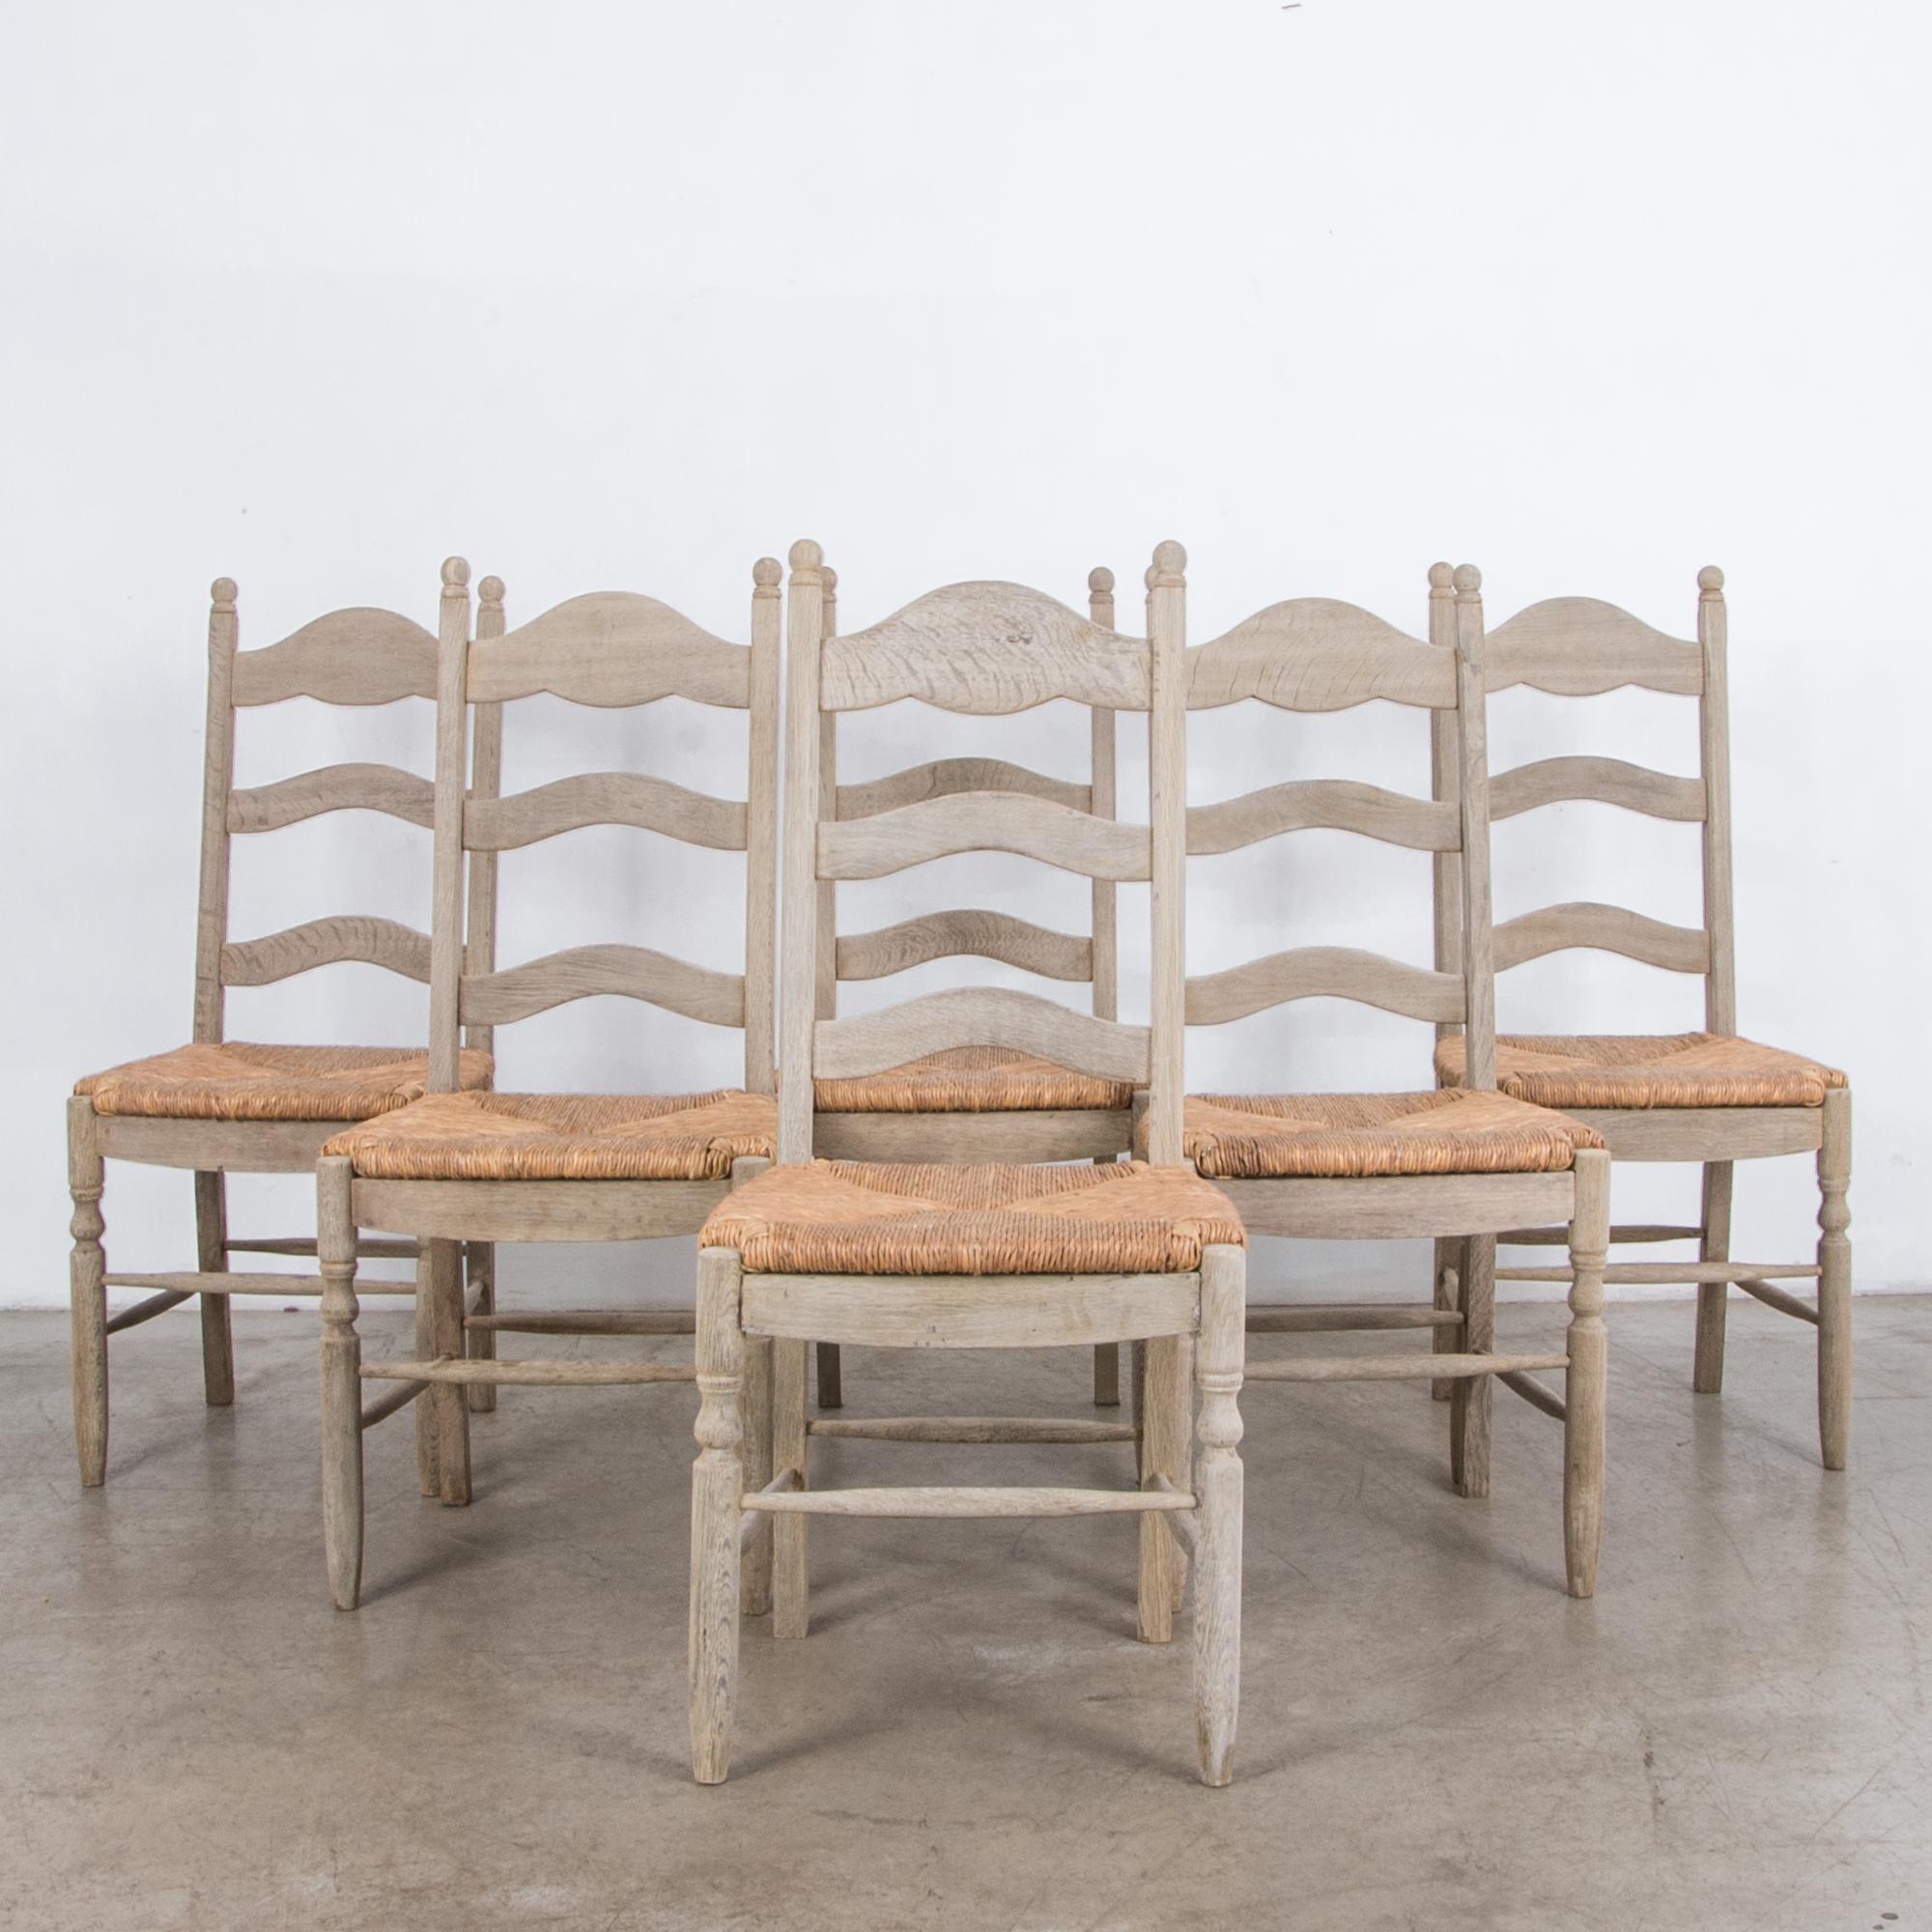 From Belgium, circa 1950, this set develops the form of the traditional oak dining chair seen through a simplified mid-20th century modernist lens. With clear oil and wax finish and hand twisted rush seat, a natural color palette and homage to the